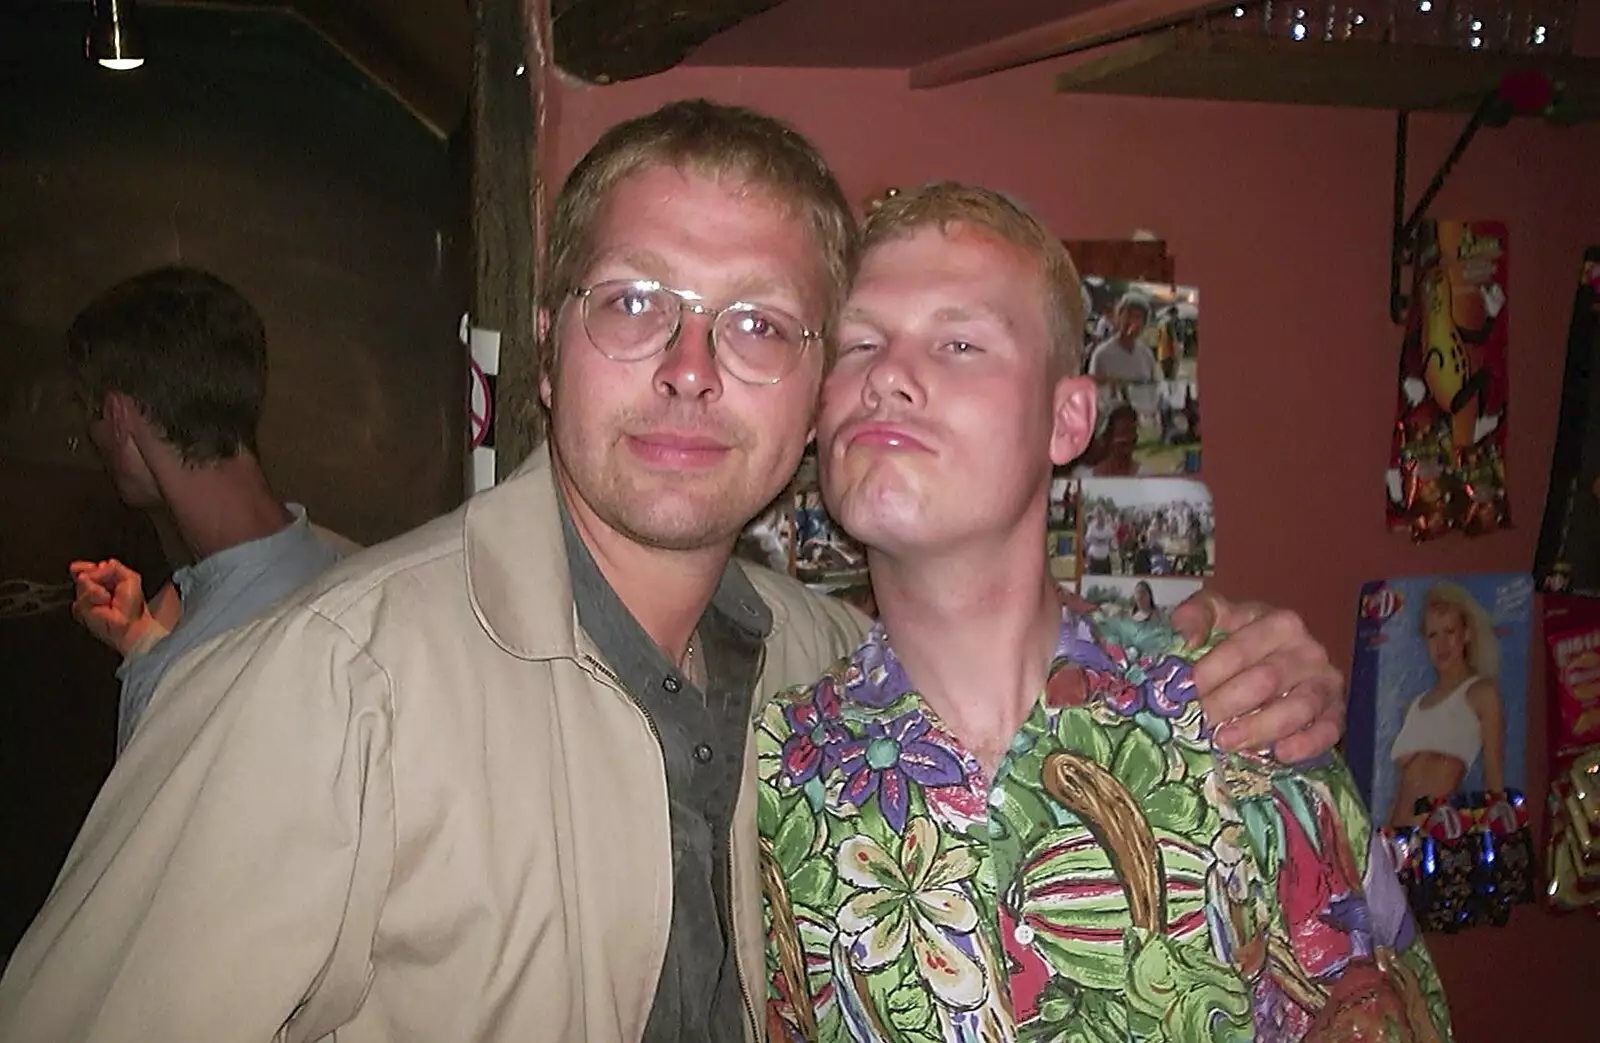 Marc and Mikey P, from Paul's Stag Night, Brome, Scole and Bressingham - Friday 20th August 2004